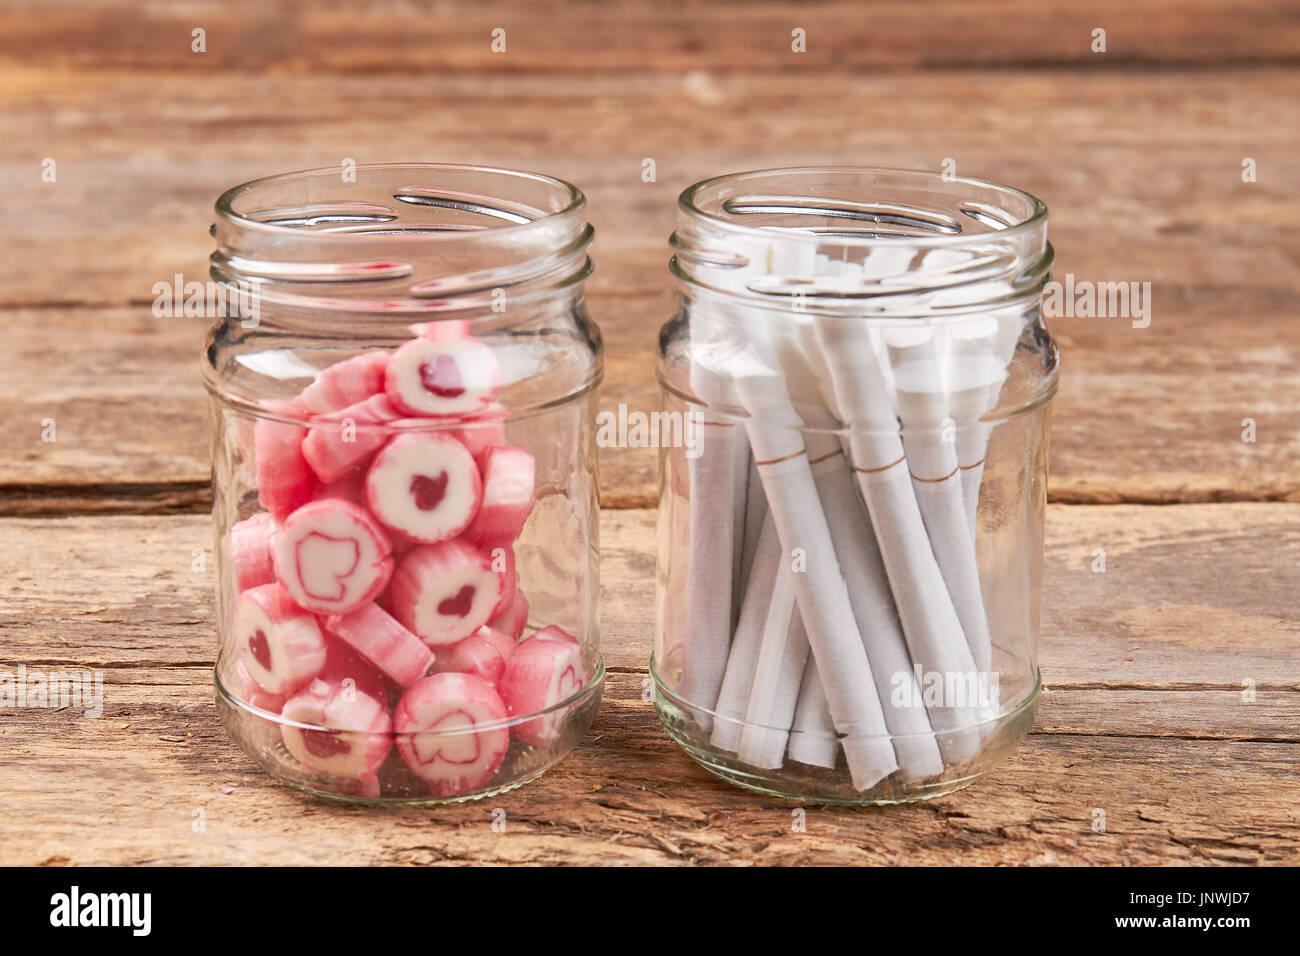 Jars with sweets and cigarettes. Stock Photo